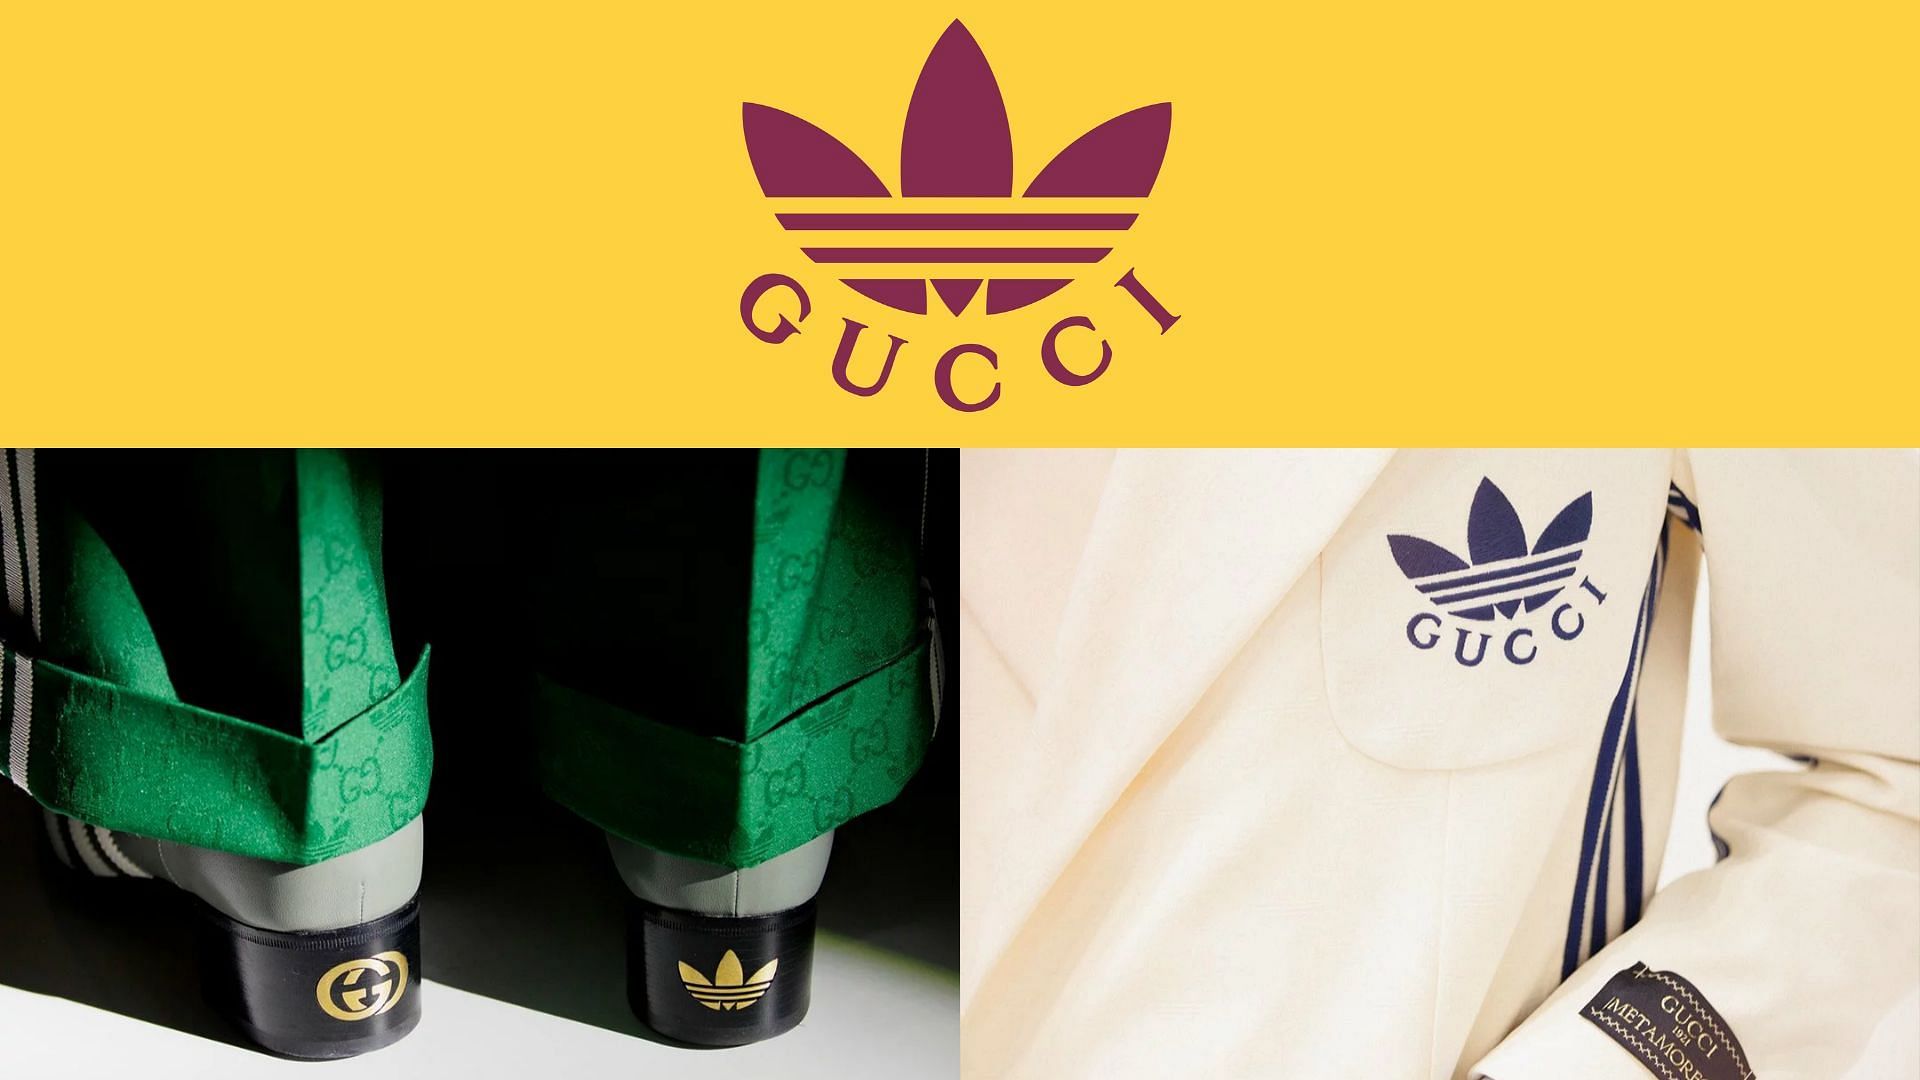 The pieces we're most excited about from the Adidas x Gucci